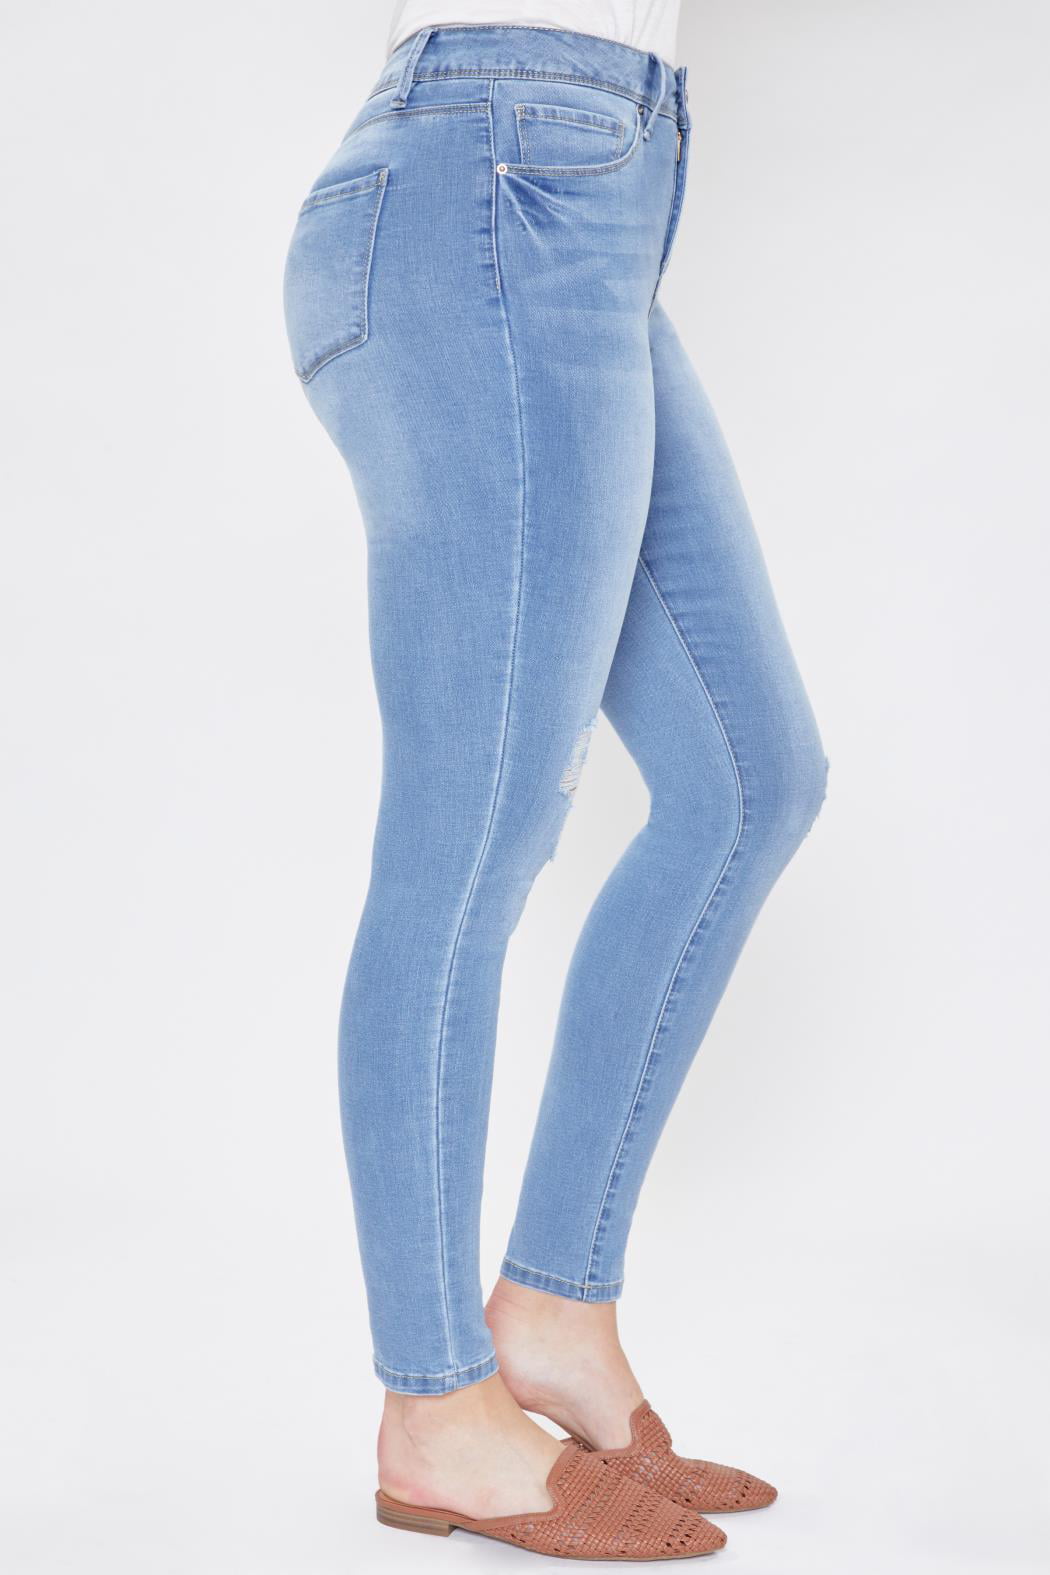 Royalty For Me High Rise Tummy Control Women's Jeans